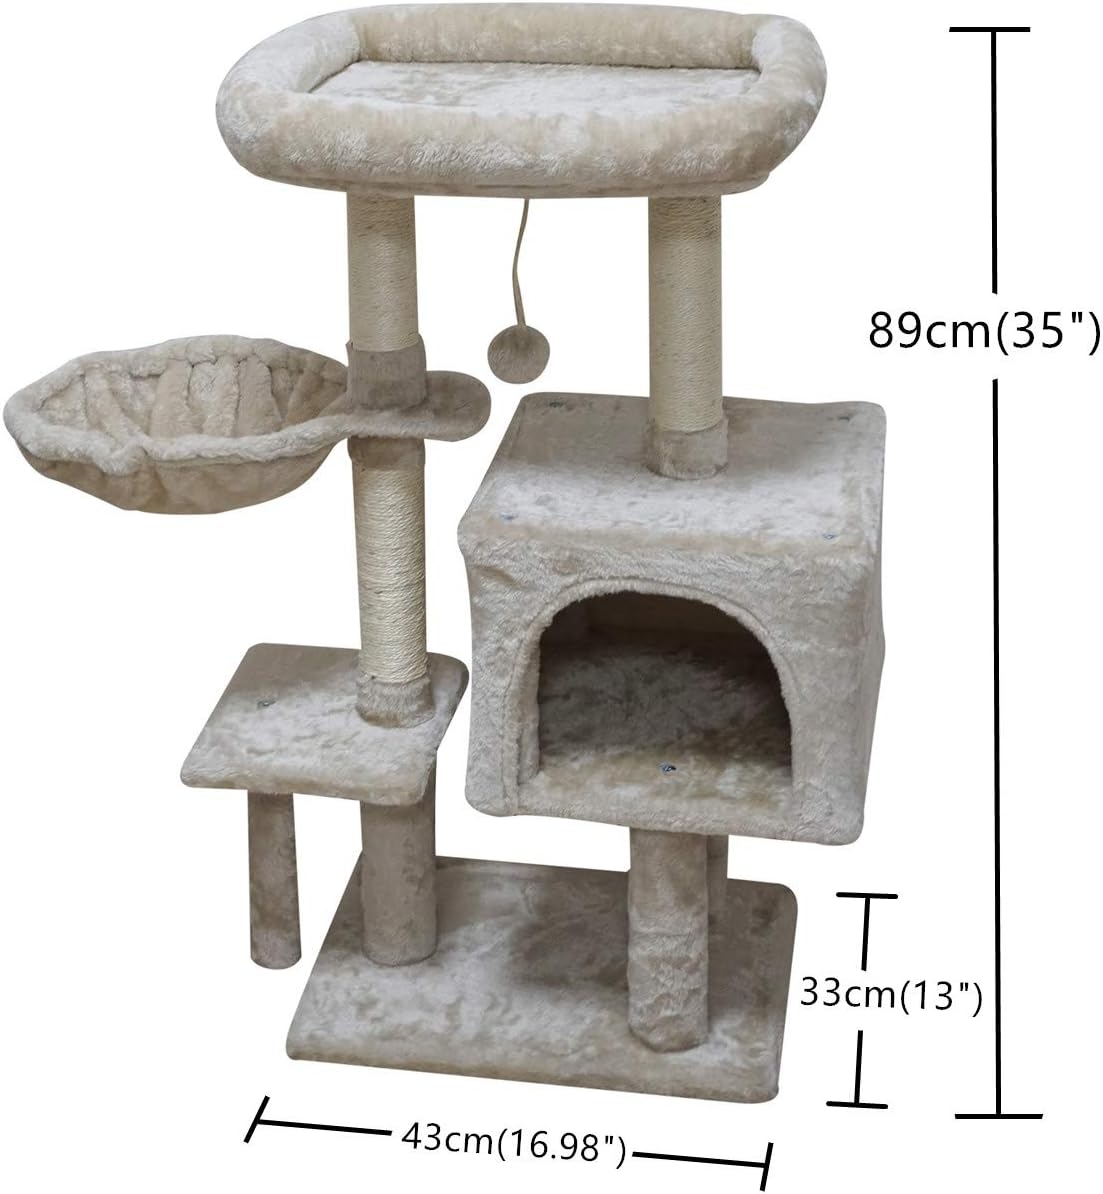 FISH&NAP Cat Tree Cat Tower Cat Condo Sisal Scratching Posts with Jump Platform Cat Furniture Activity Center Play House Grey